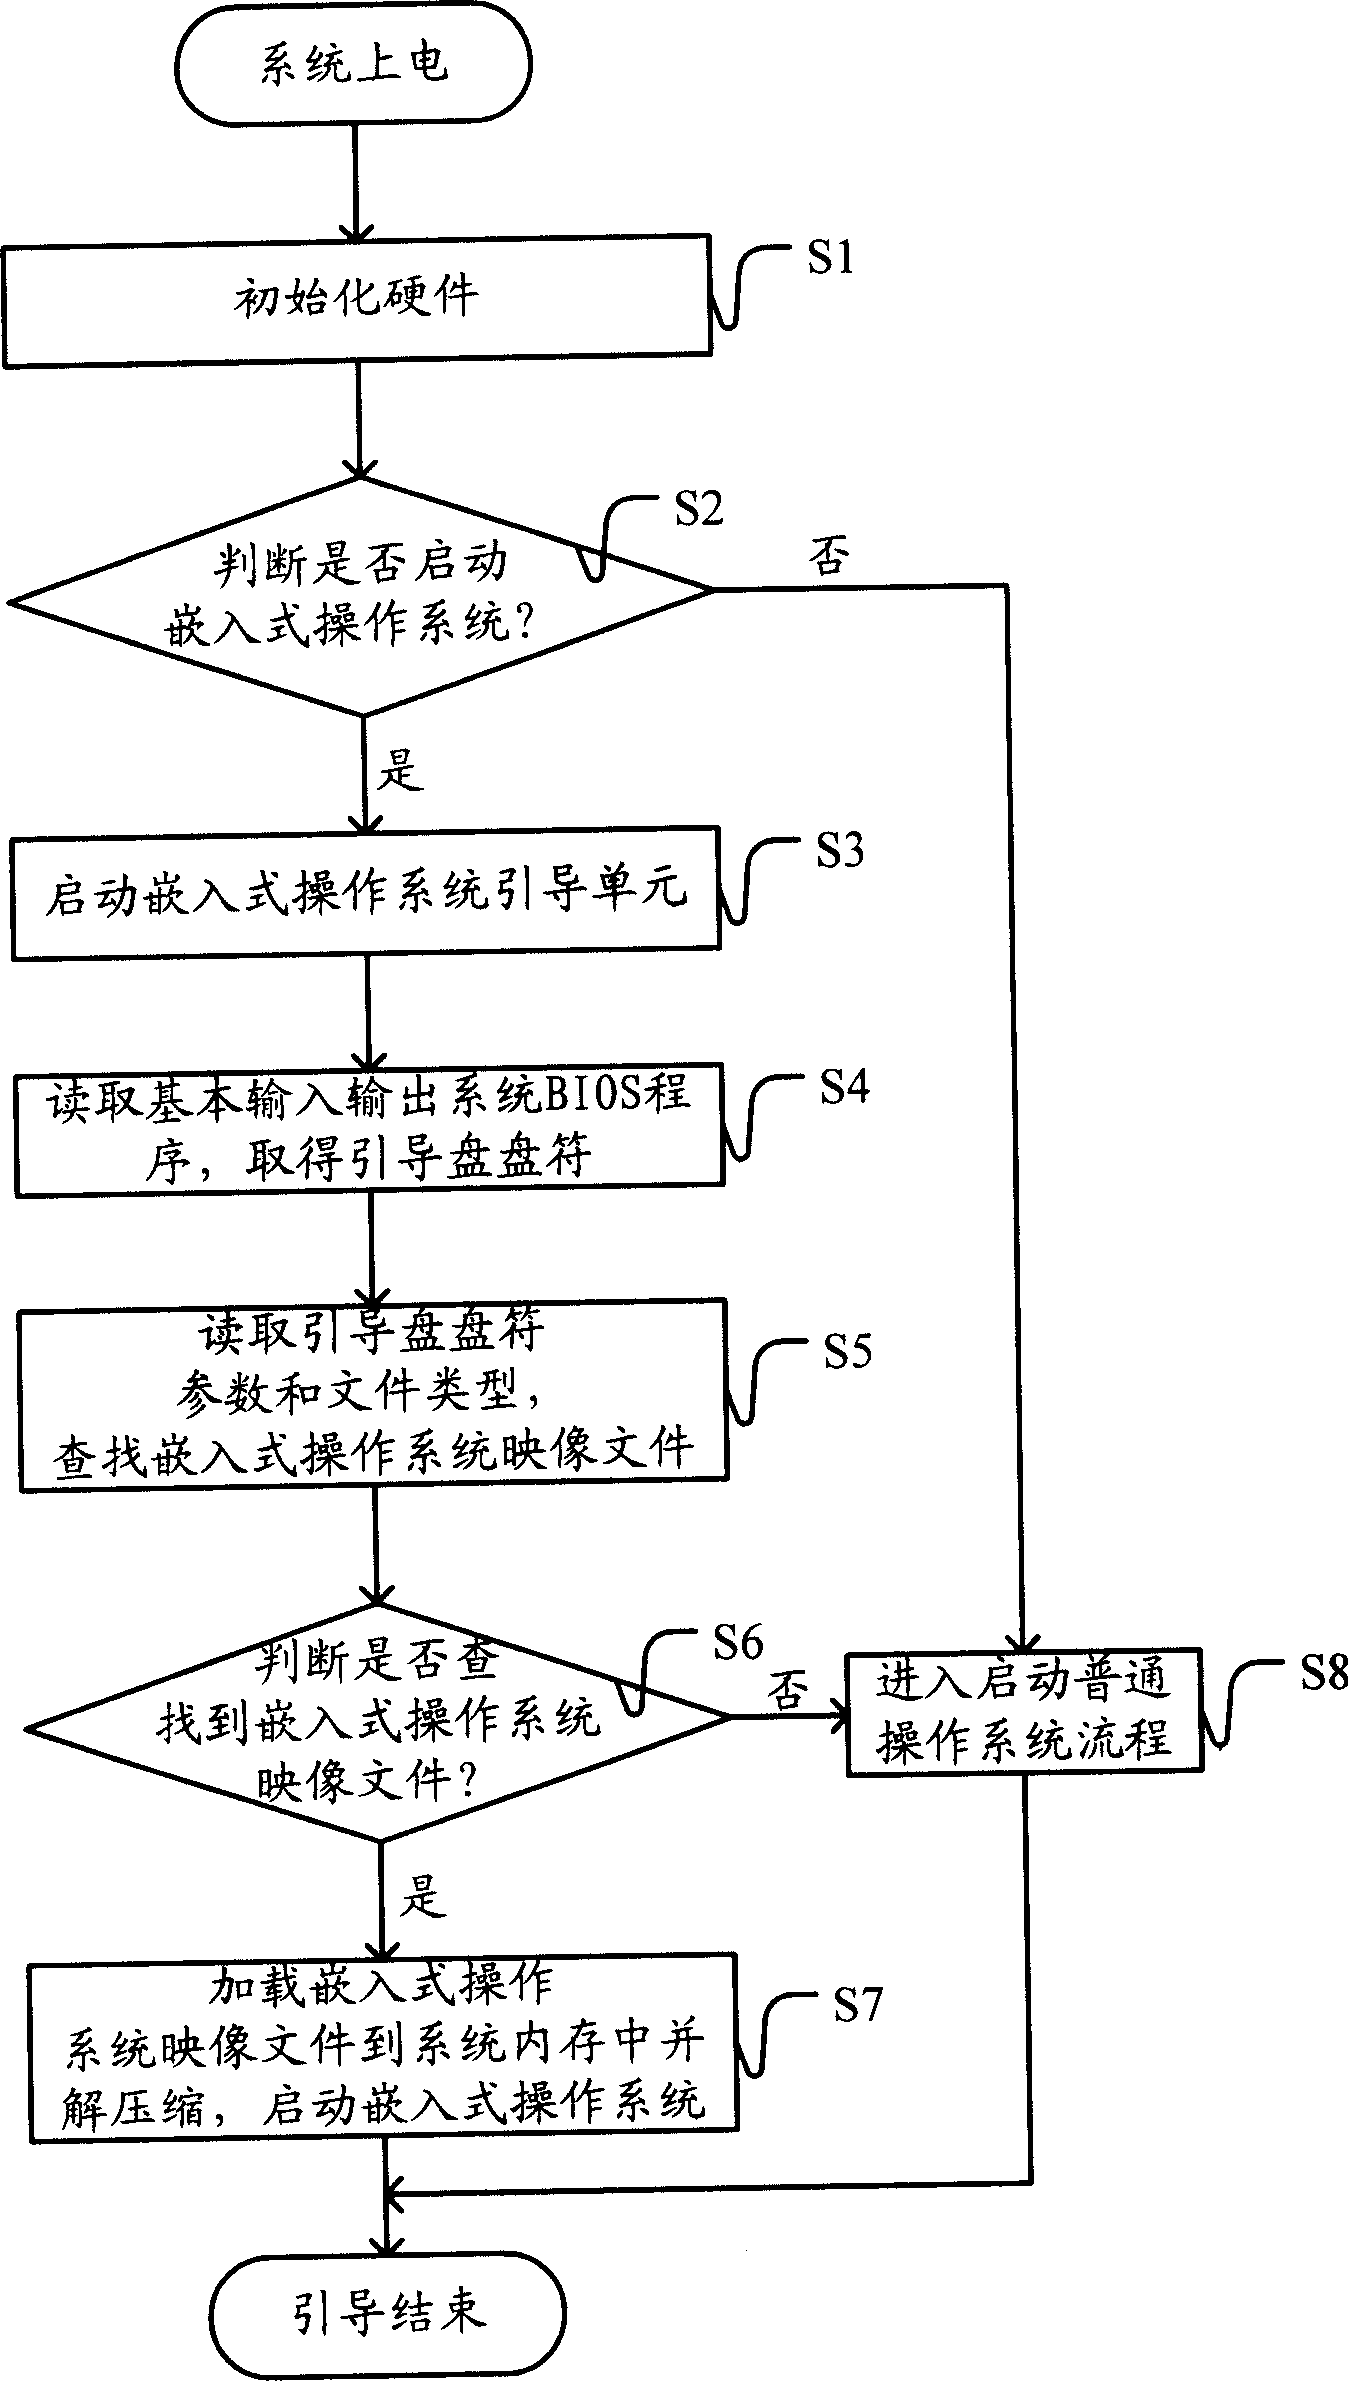 Embedded type operating system mapping file guiding method and device